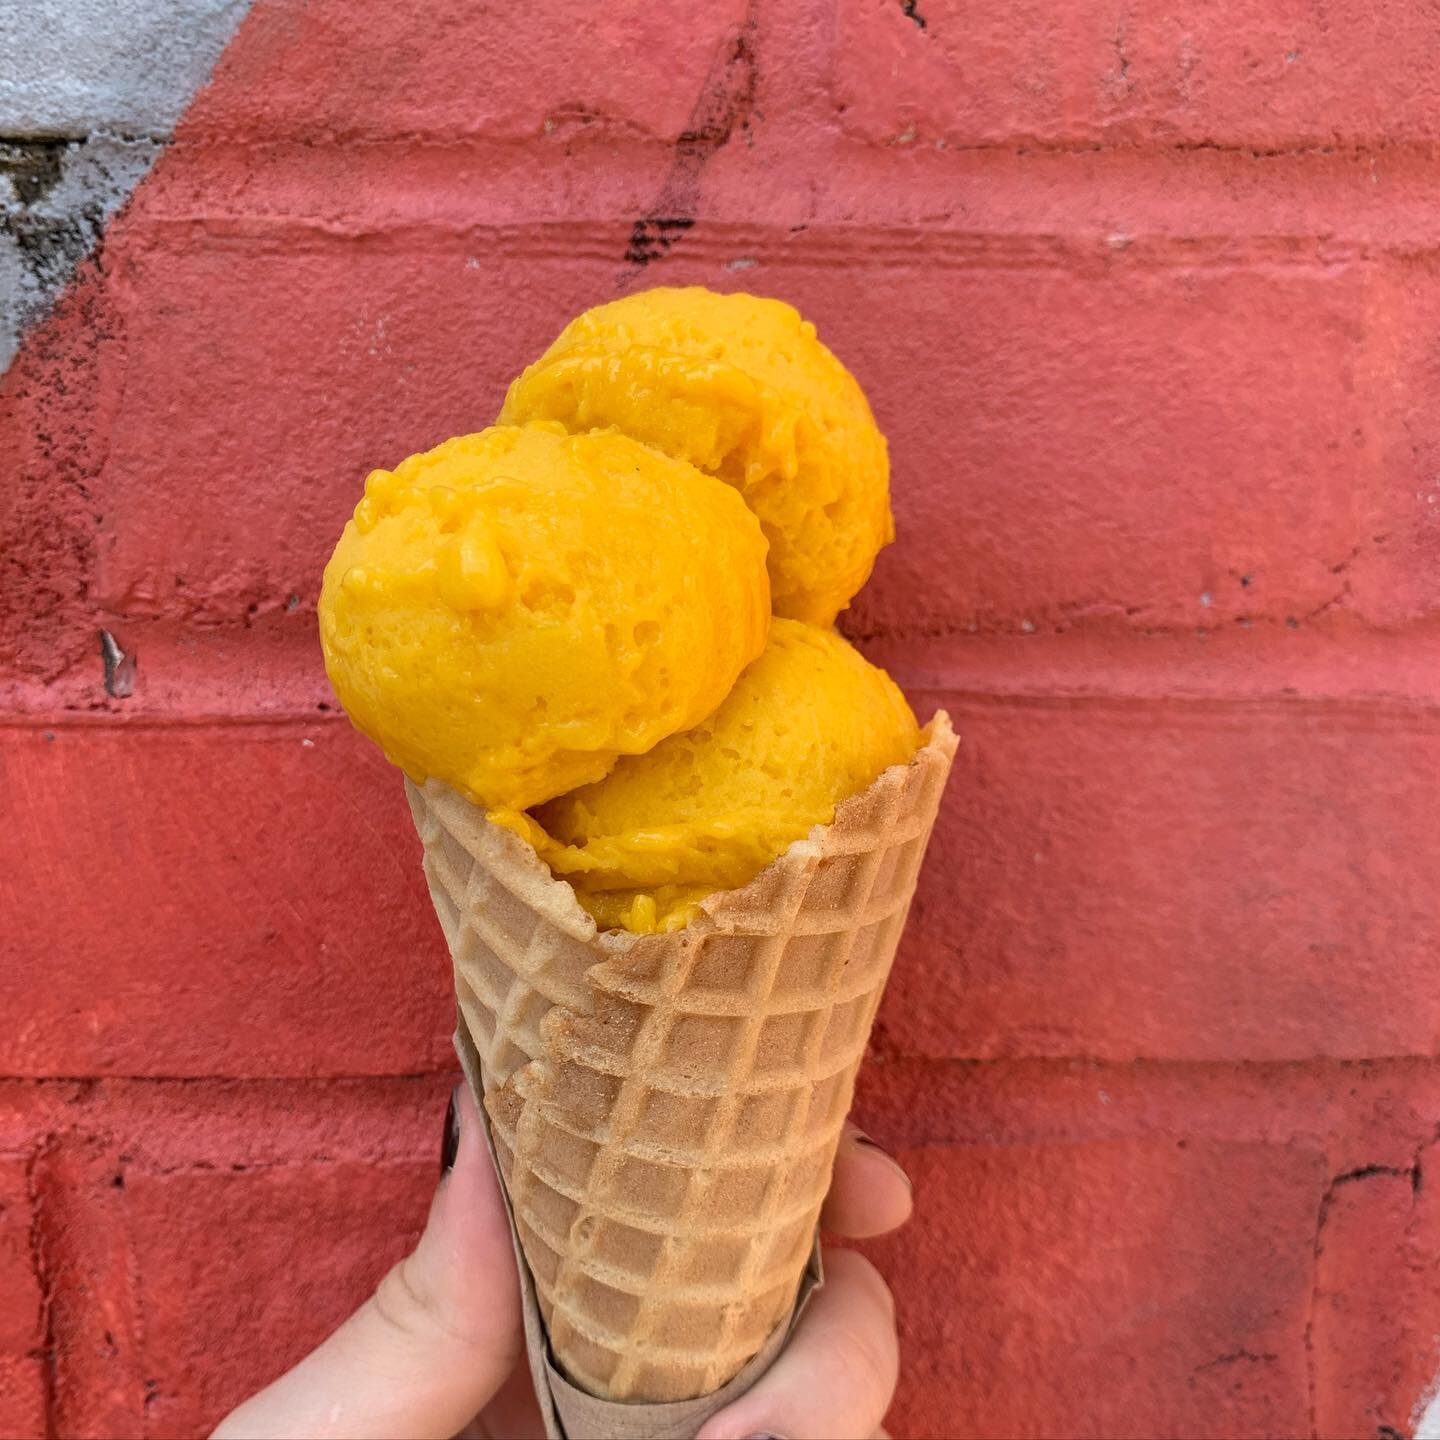 Enjoy the last days of Summer with our super refreshing Mango Sorbet 🥭 
We combine mango pur&eacute;e and the fruit chunks to provide ultra flavor 🔆
.
.
.
#gelato #icecream #dessert #atlanta